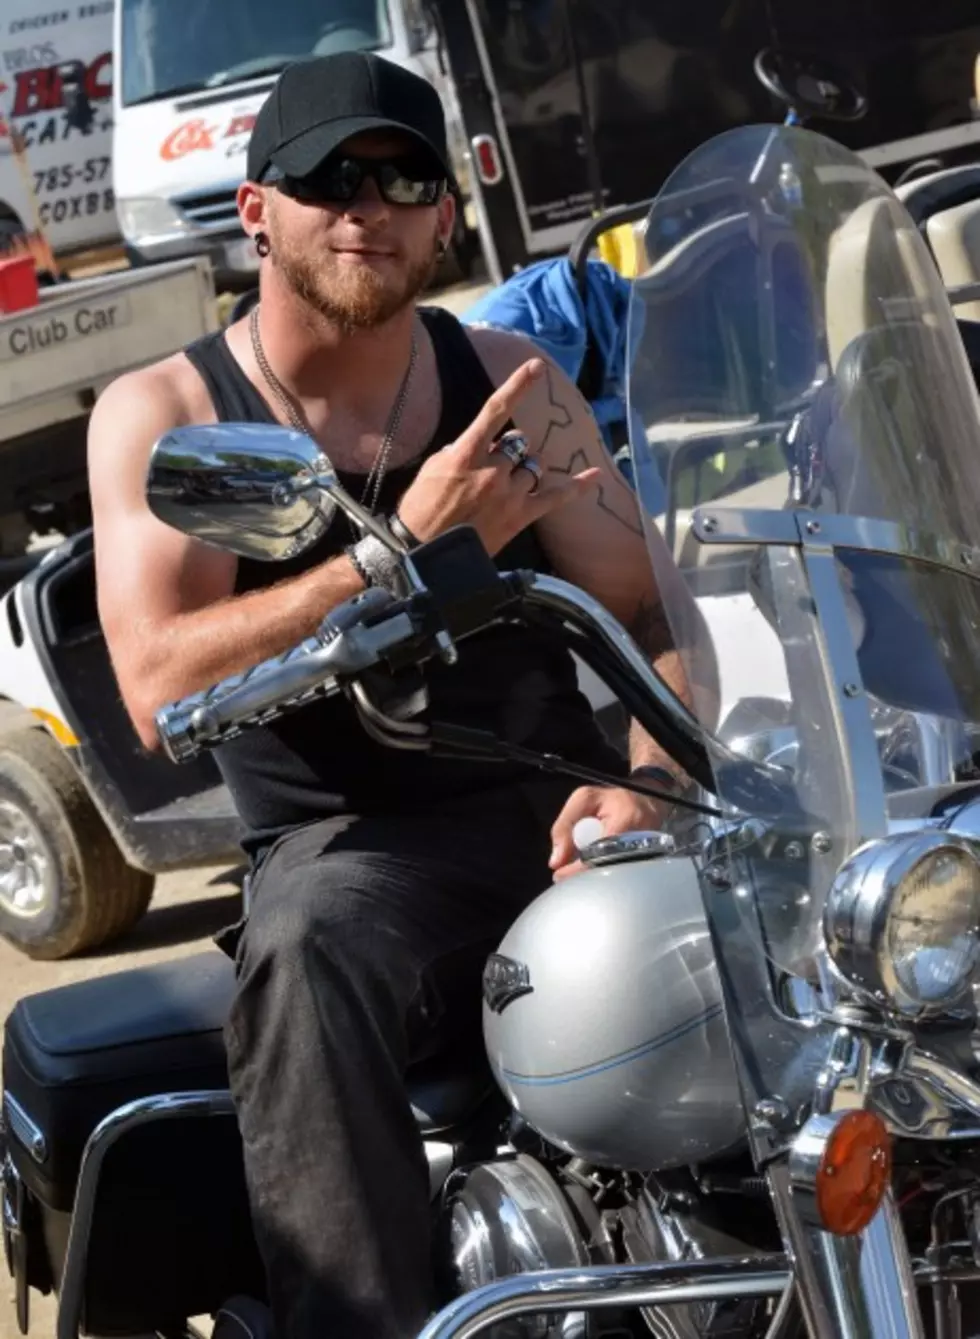 From Athens to Arlington Motorcycle Ride With Brantley Gilbert [VIDEO]